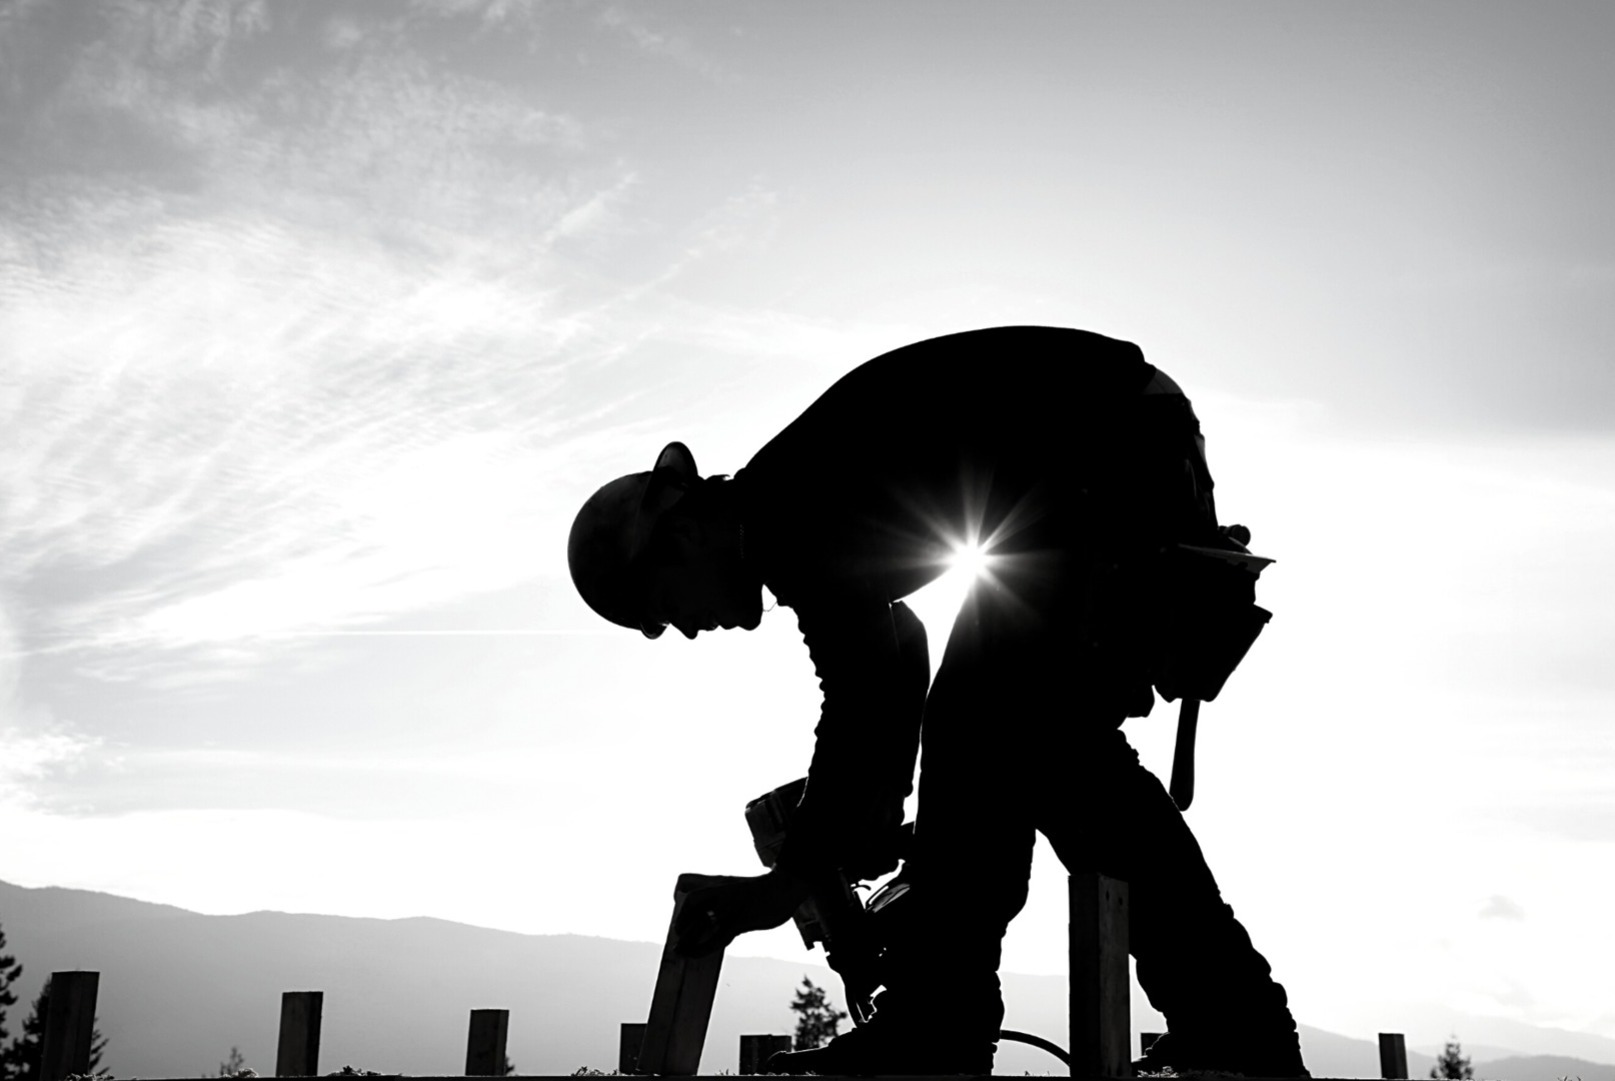 Silhouette of subcontractor using grinder